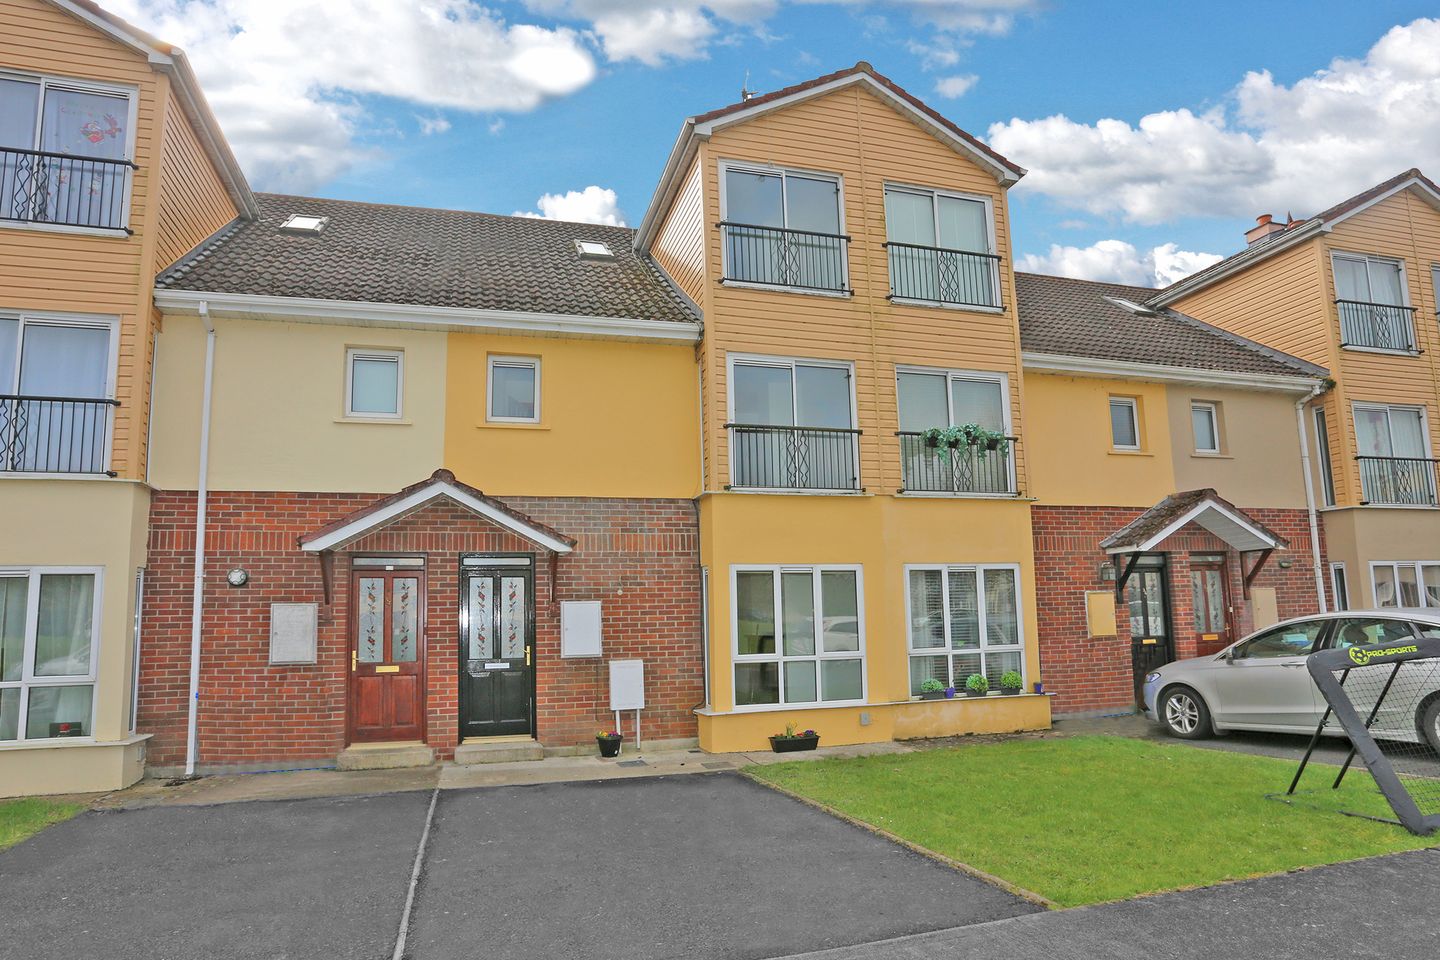 35 Willow Crescent, Riverbank, Annacotty, Co. Limerick, V94Y9D8